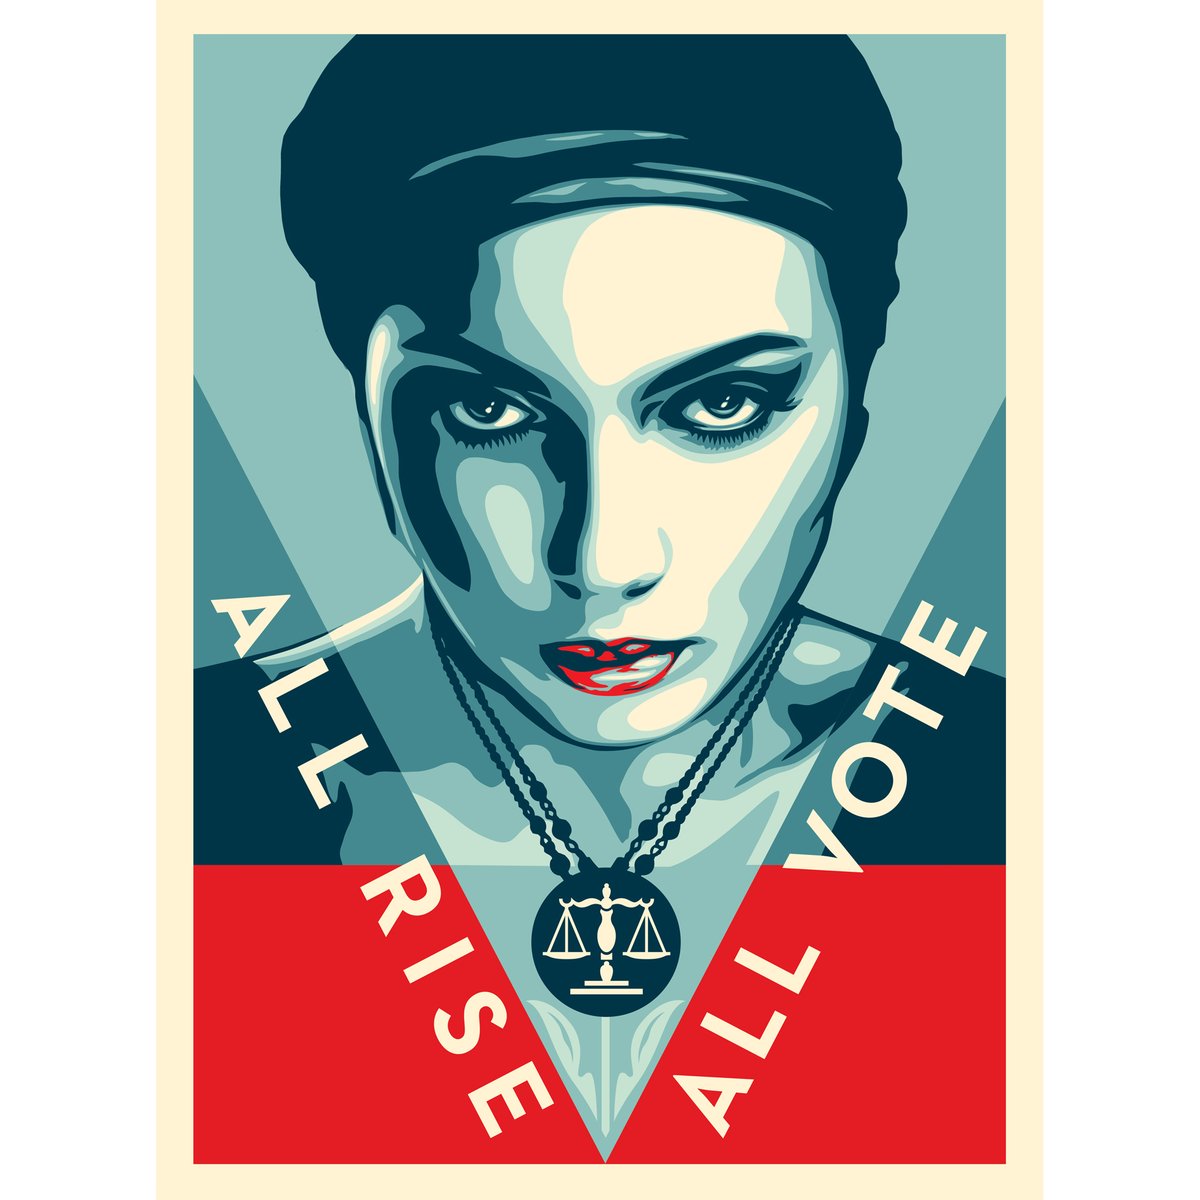 This election is OUR fight. The SCOTUS confirmation is disheartening, but we won’t give up. We’re building the future we want — where everyone can control their bodies, access health care, and love who they want. Use your power. Join me. VOTE. Text PLAN to 22422 #AllRise